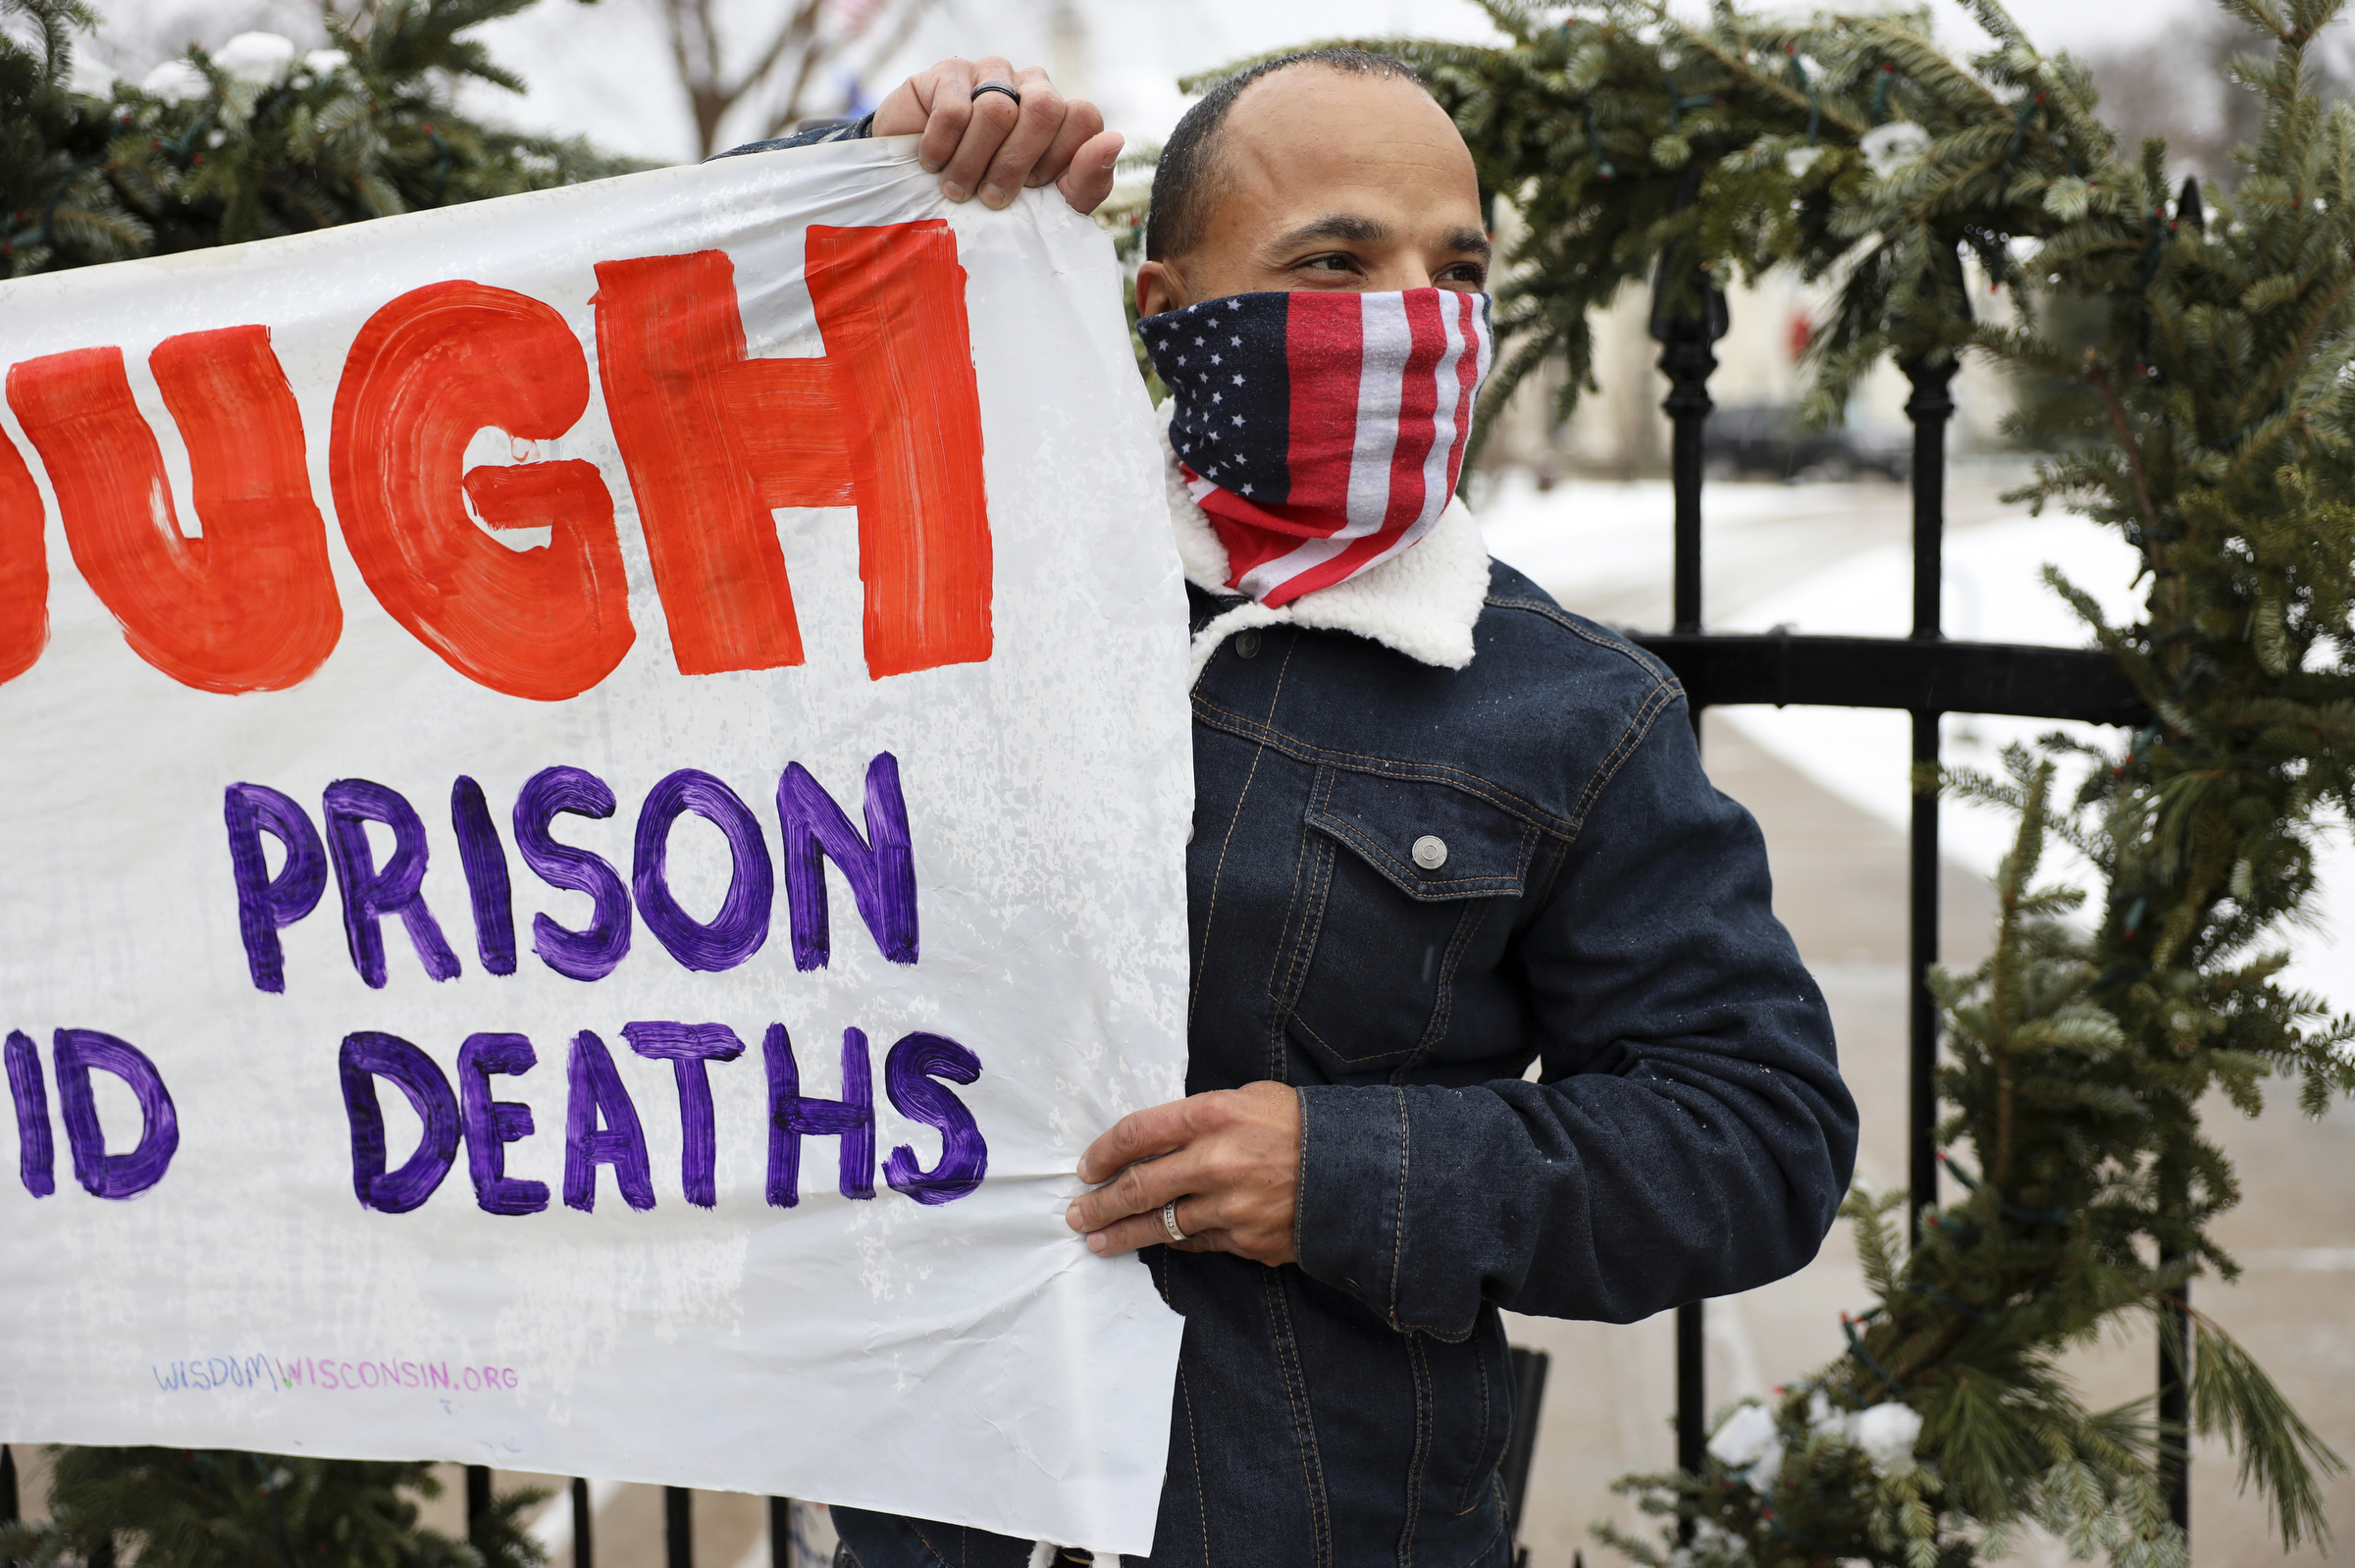 Ramiah Whiteside of Milwaukee holds a sign during a protest against the spread of COVID-19 in Wisconsin prisons